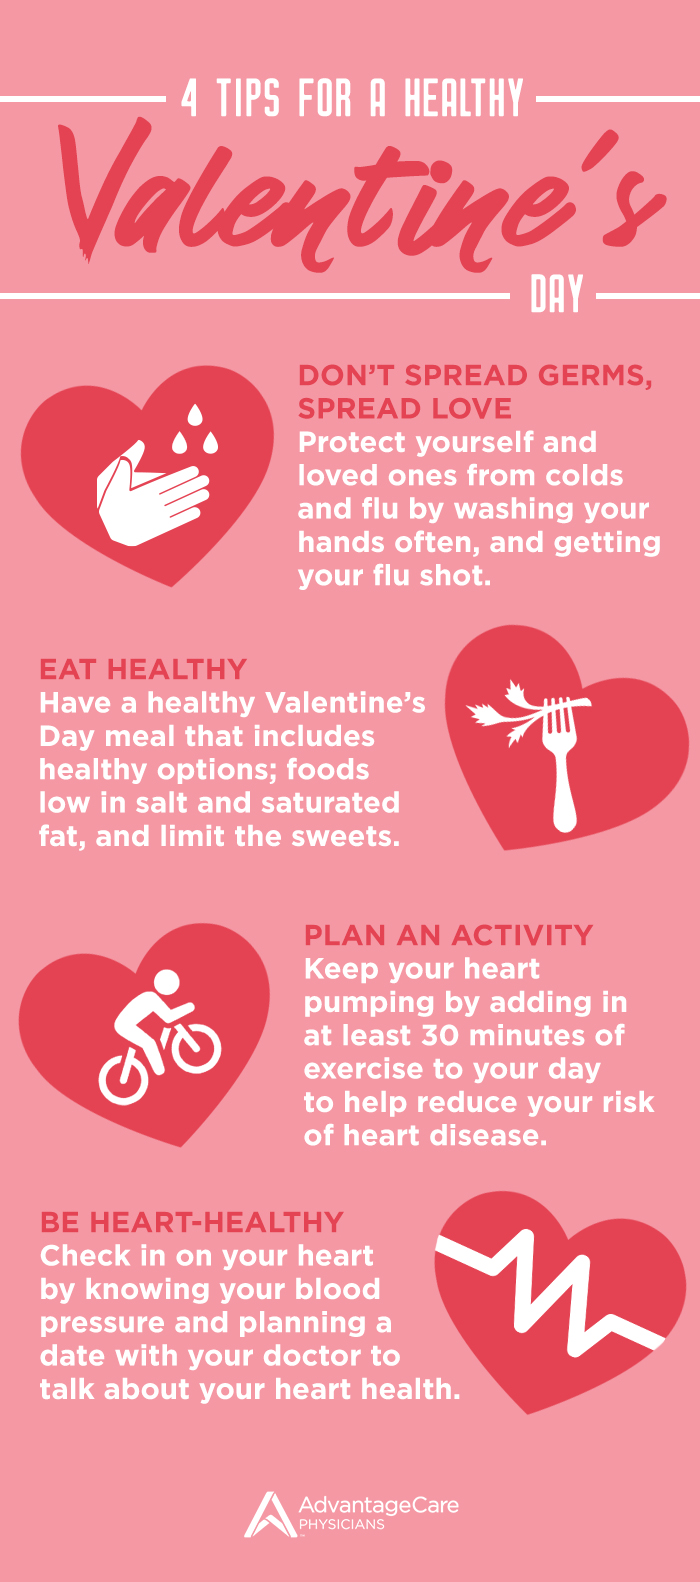 Four Tips for a Healthy Valentine's Day | AdvantageCare Physicians